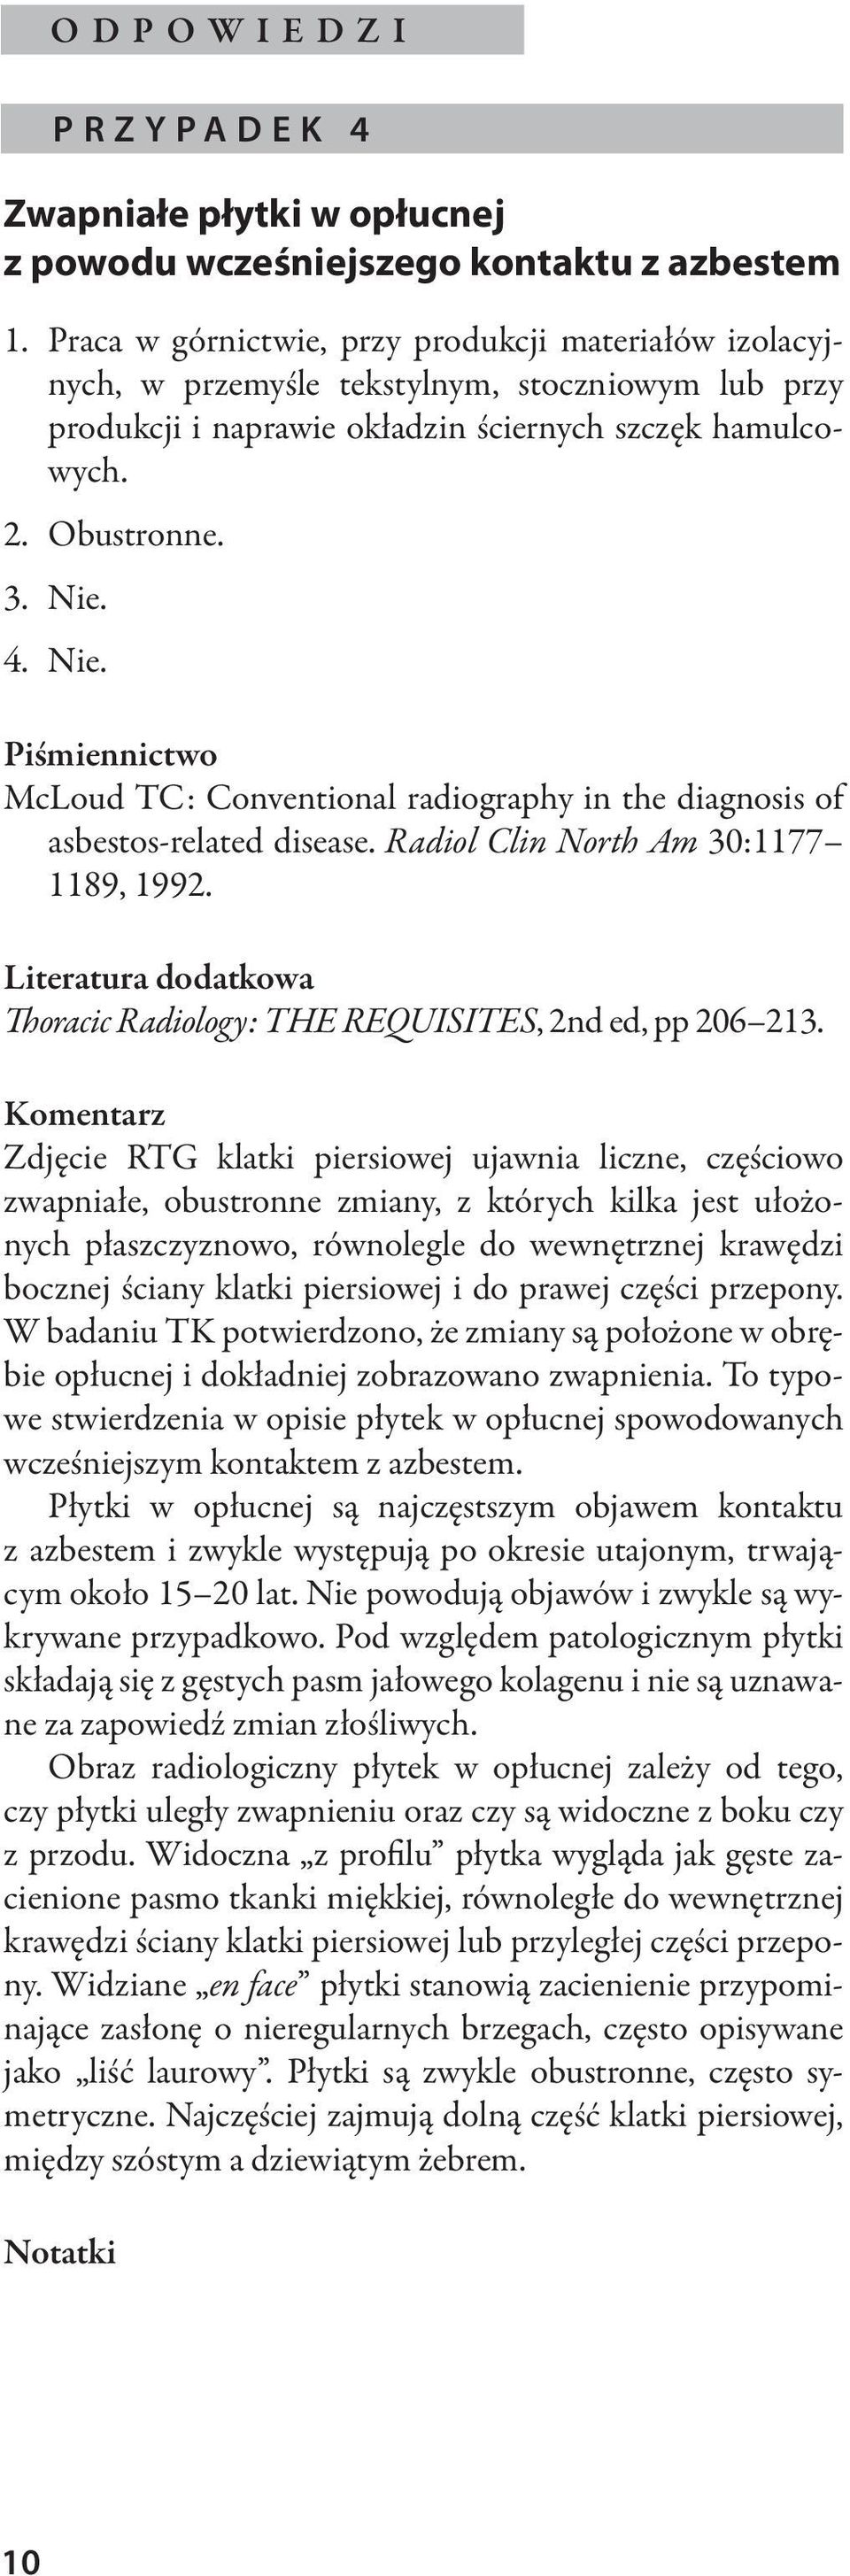 4. Nie. Piśmiennictwo McLoud TC: Conventional radiography in the diagnosis of asbestos-related disease. Radiol Clin North Am 30:1177 1189, 1992.